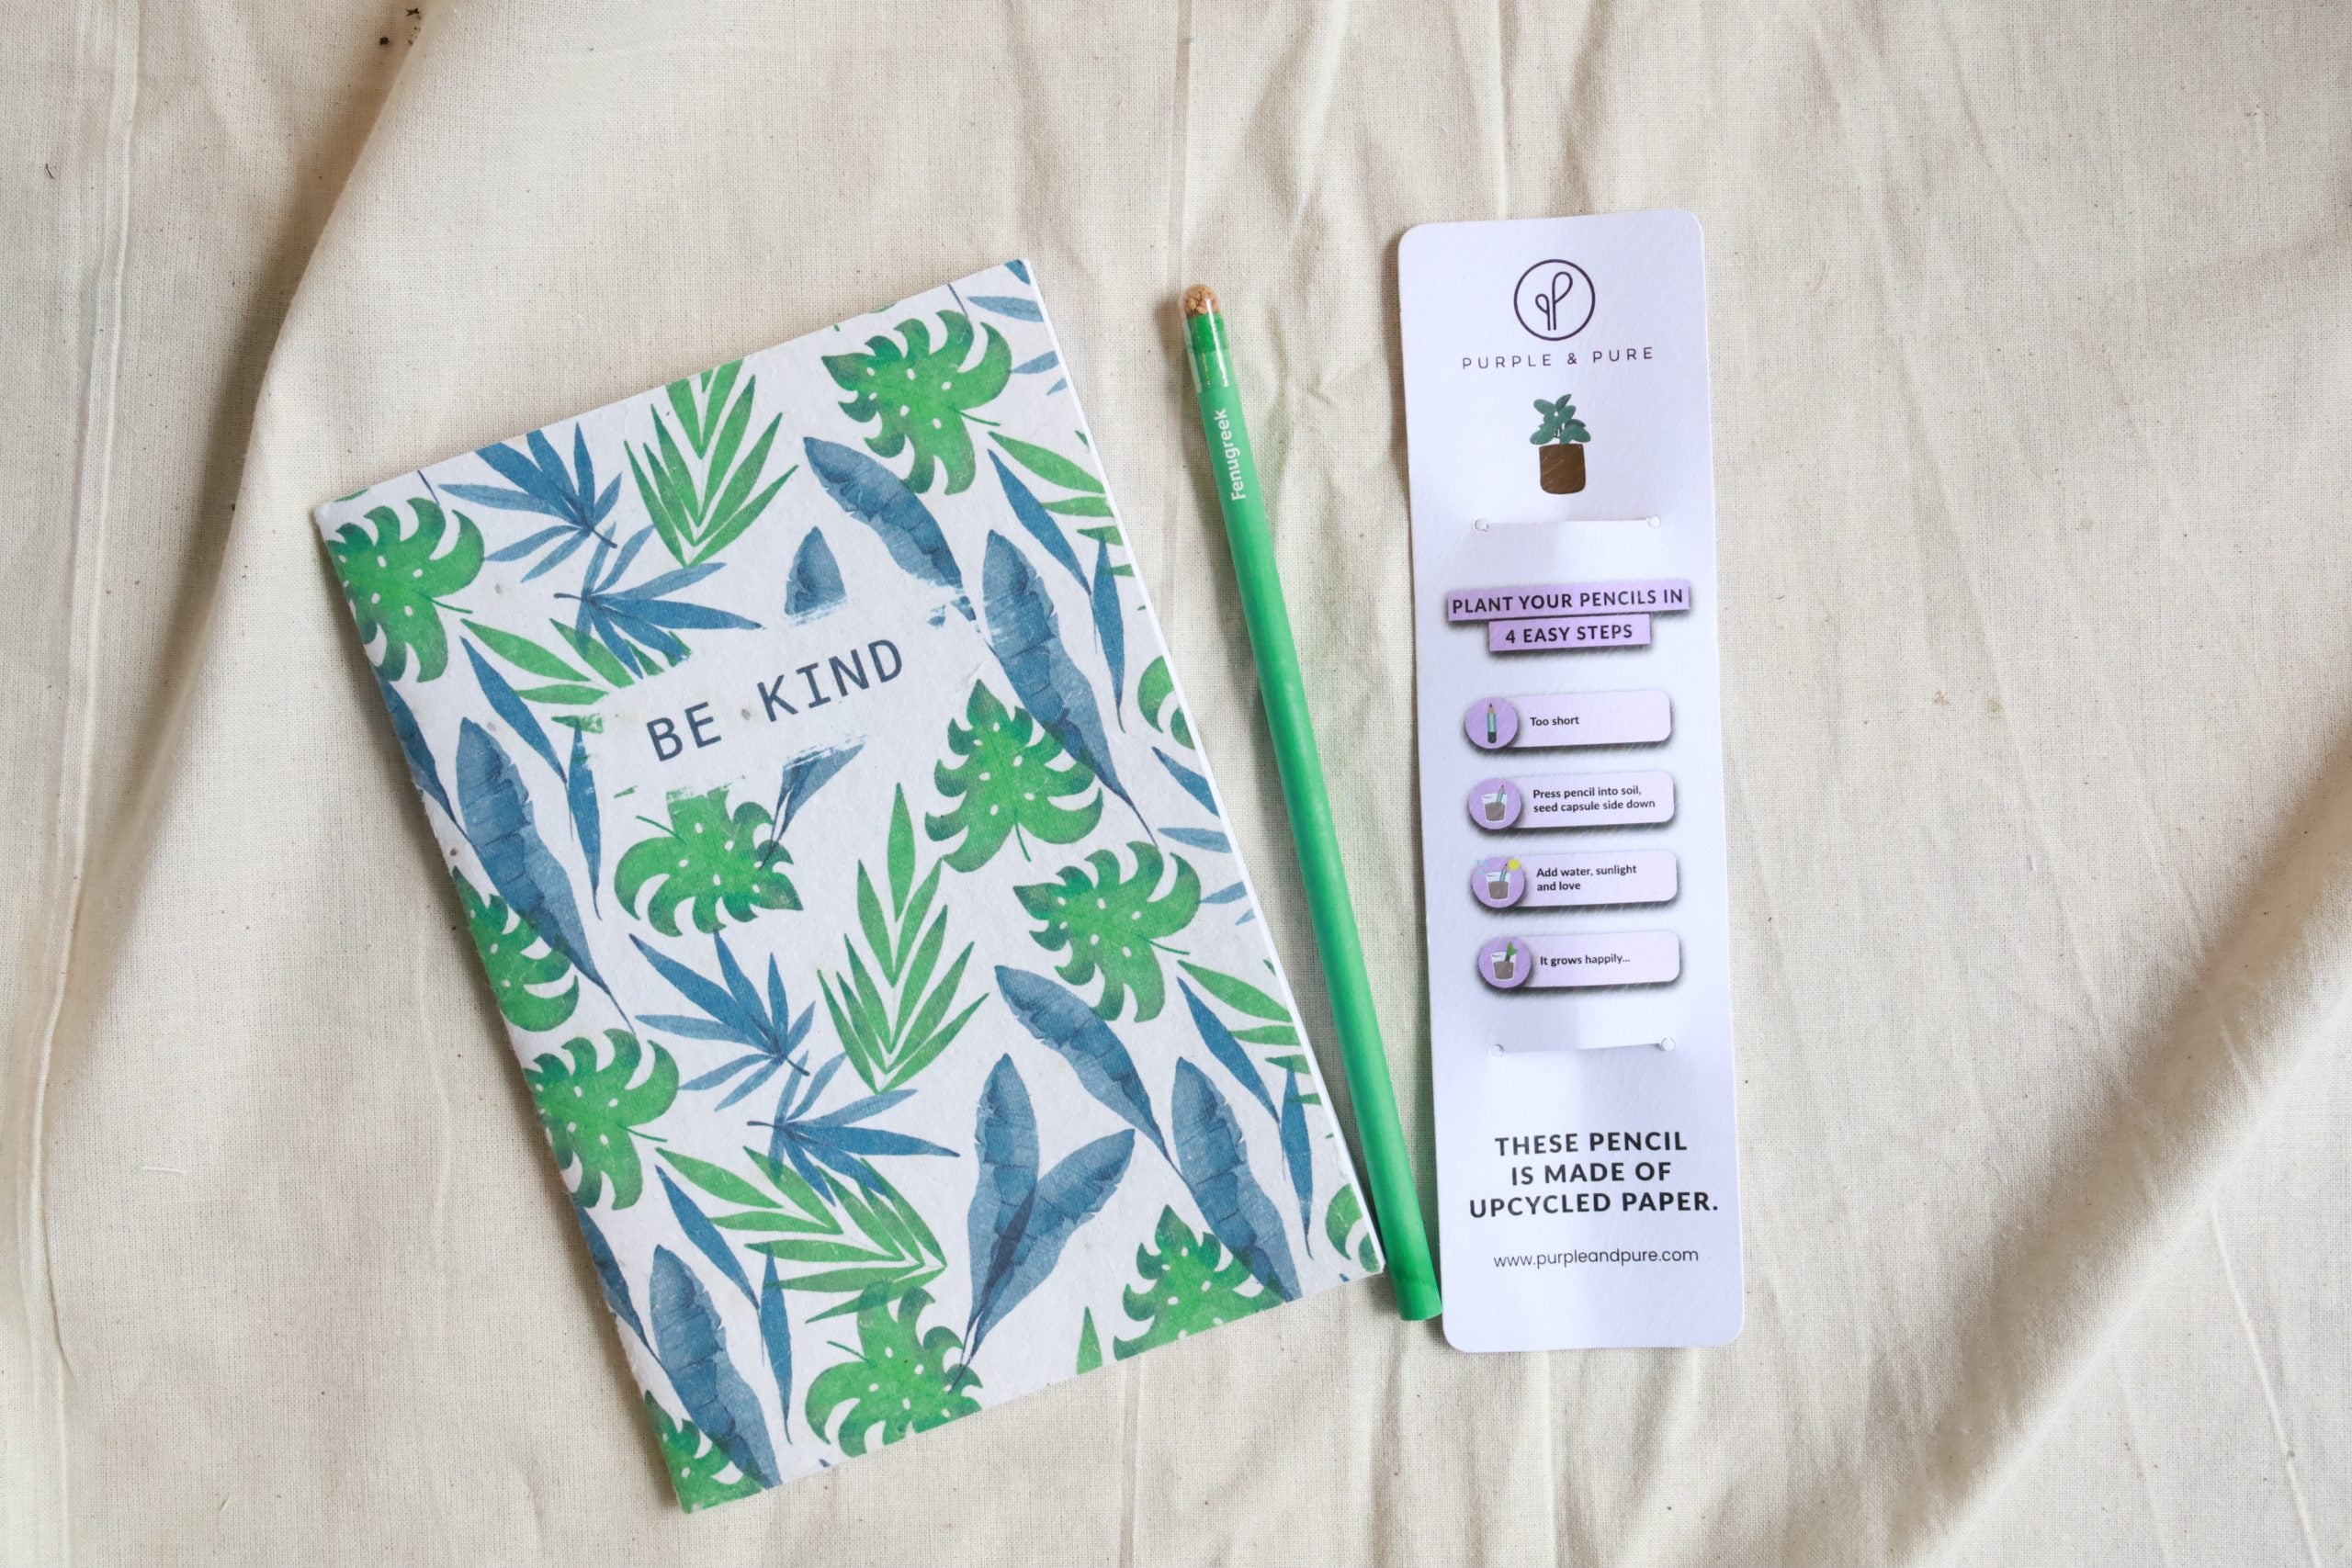 Purple & Pure Tropical Pencil Set | Buy at The Green Collective